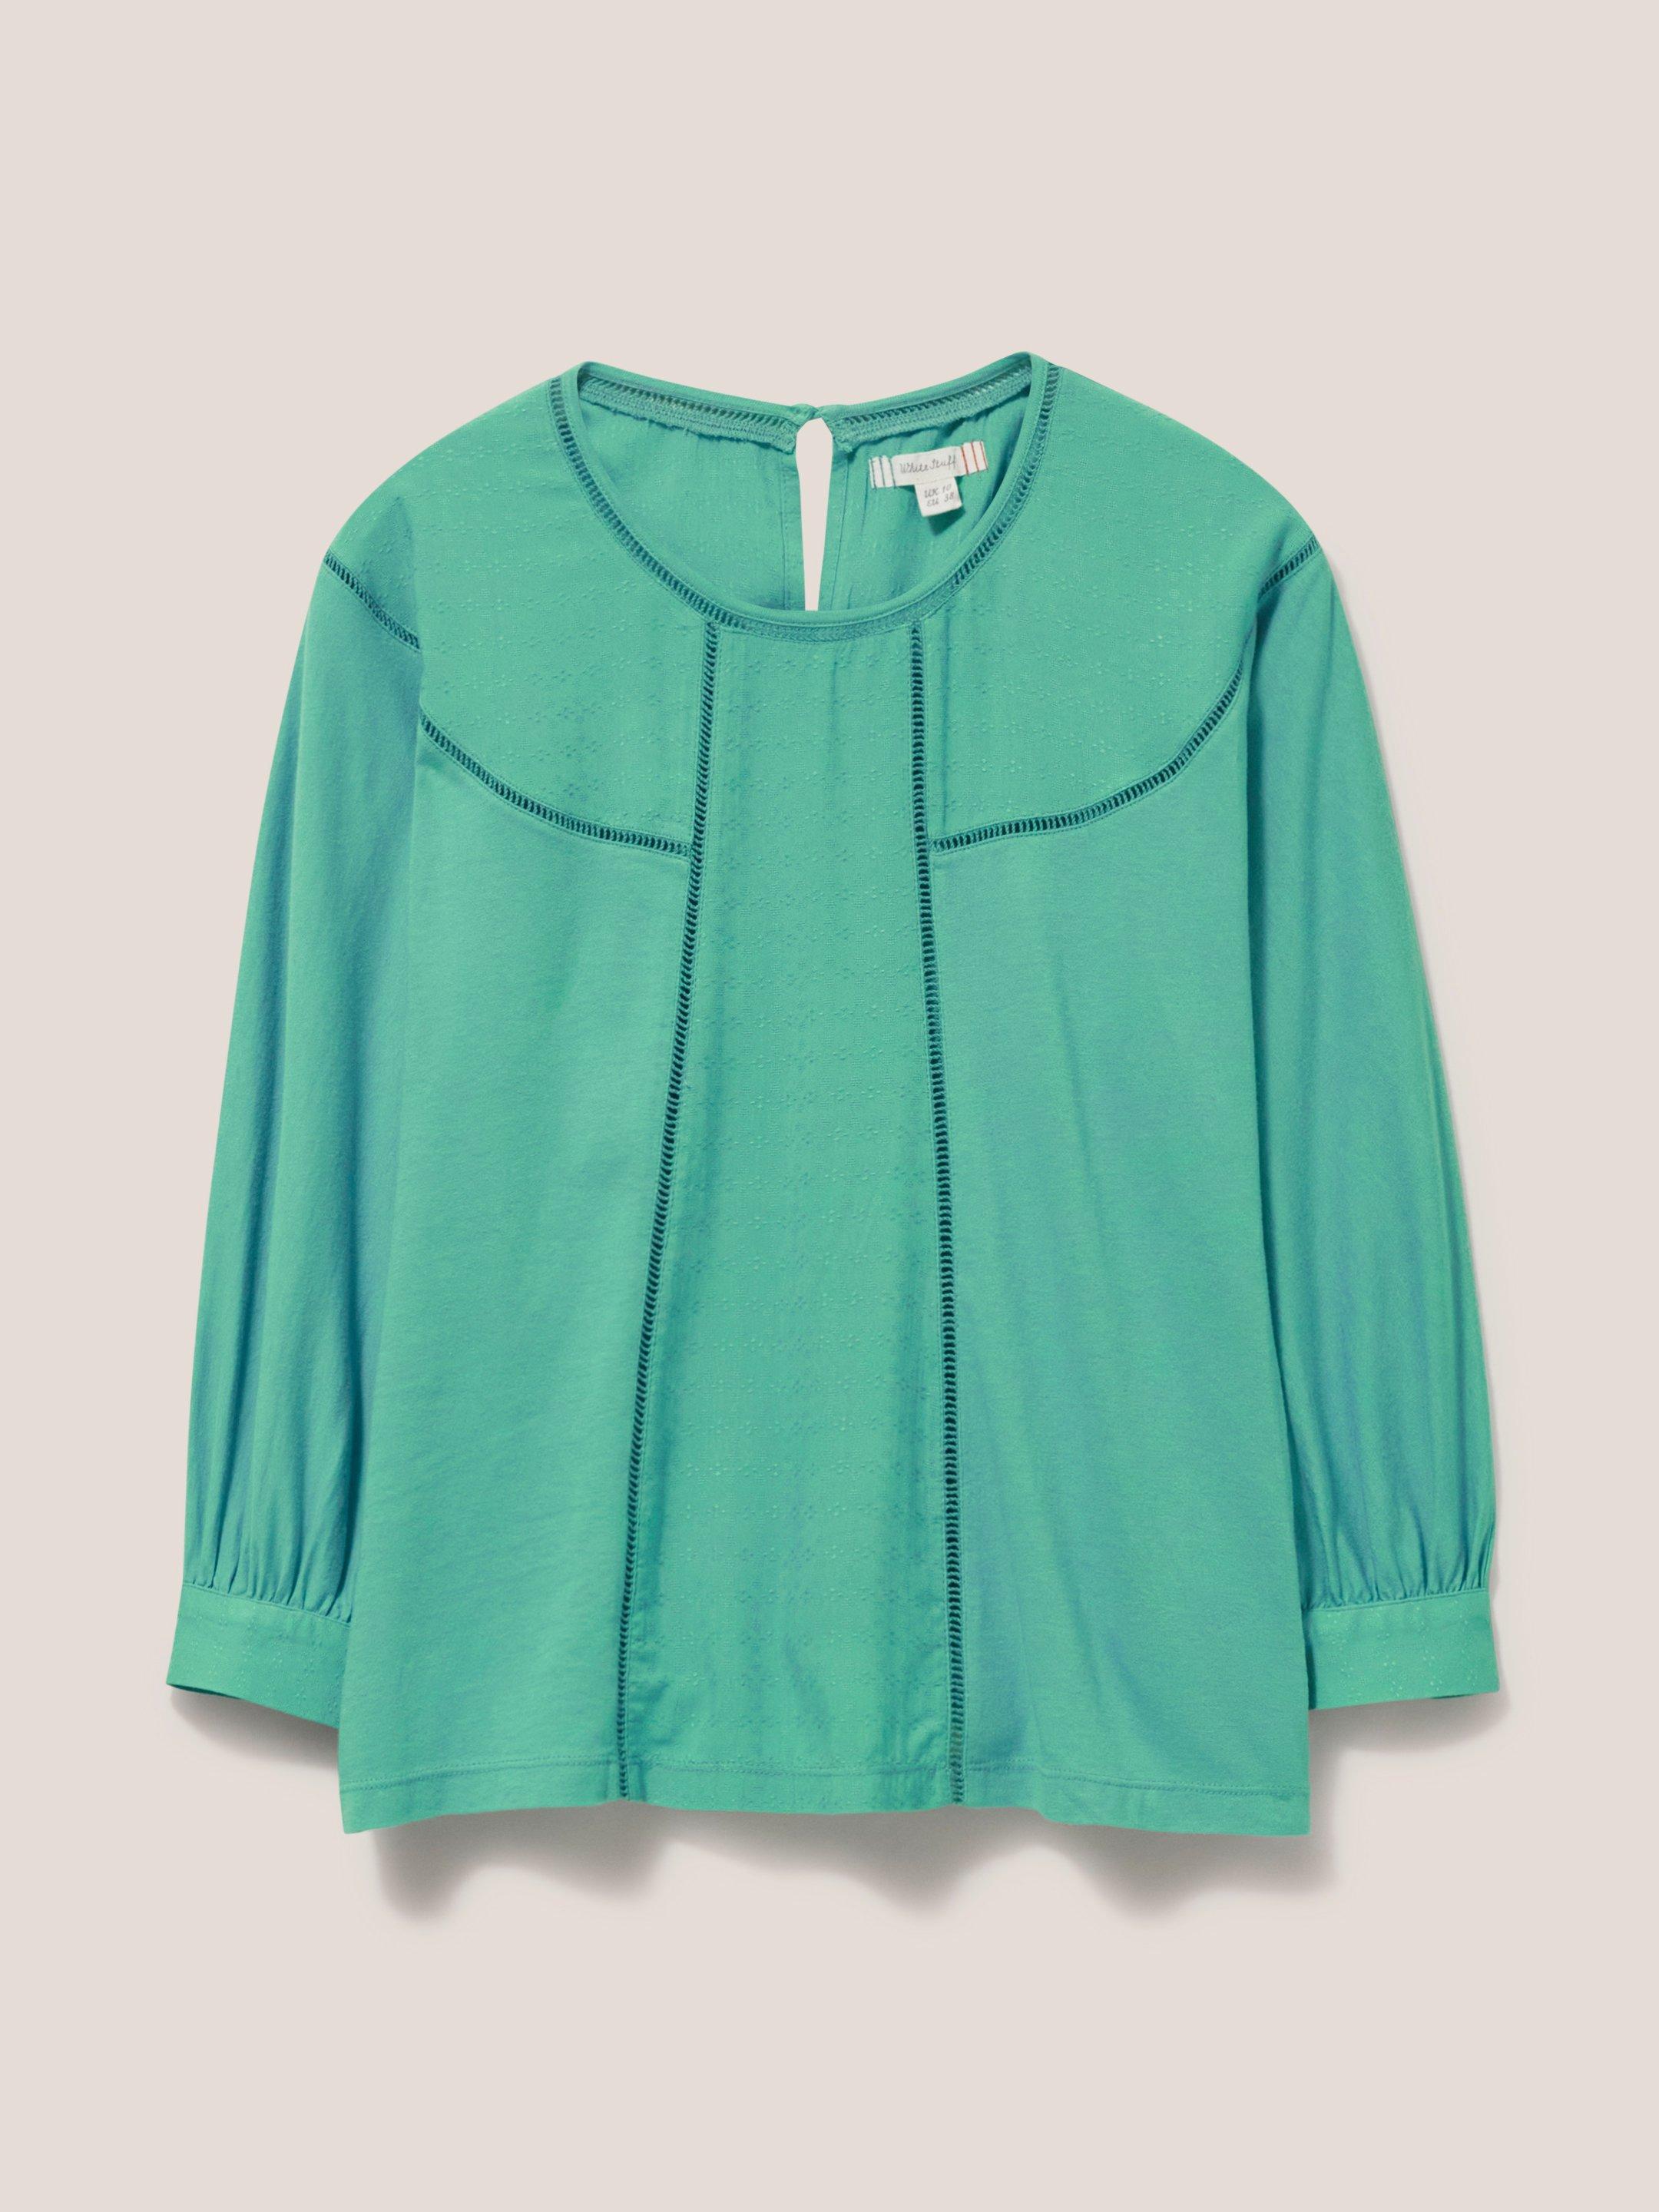 MOLLIE JERSEY MIX TOP in MID TEAL - FLAT FRONT